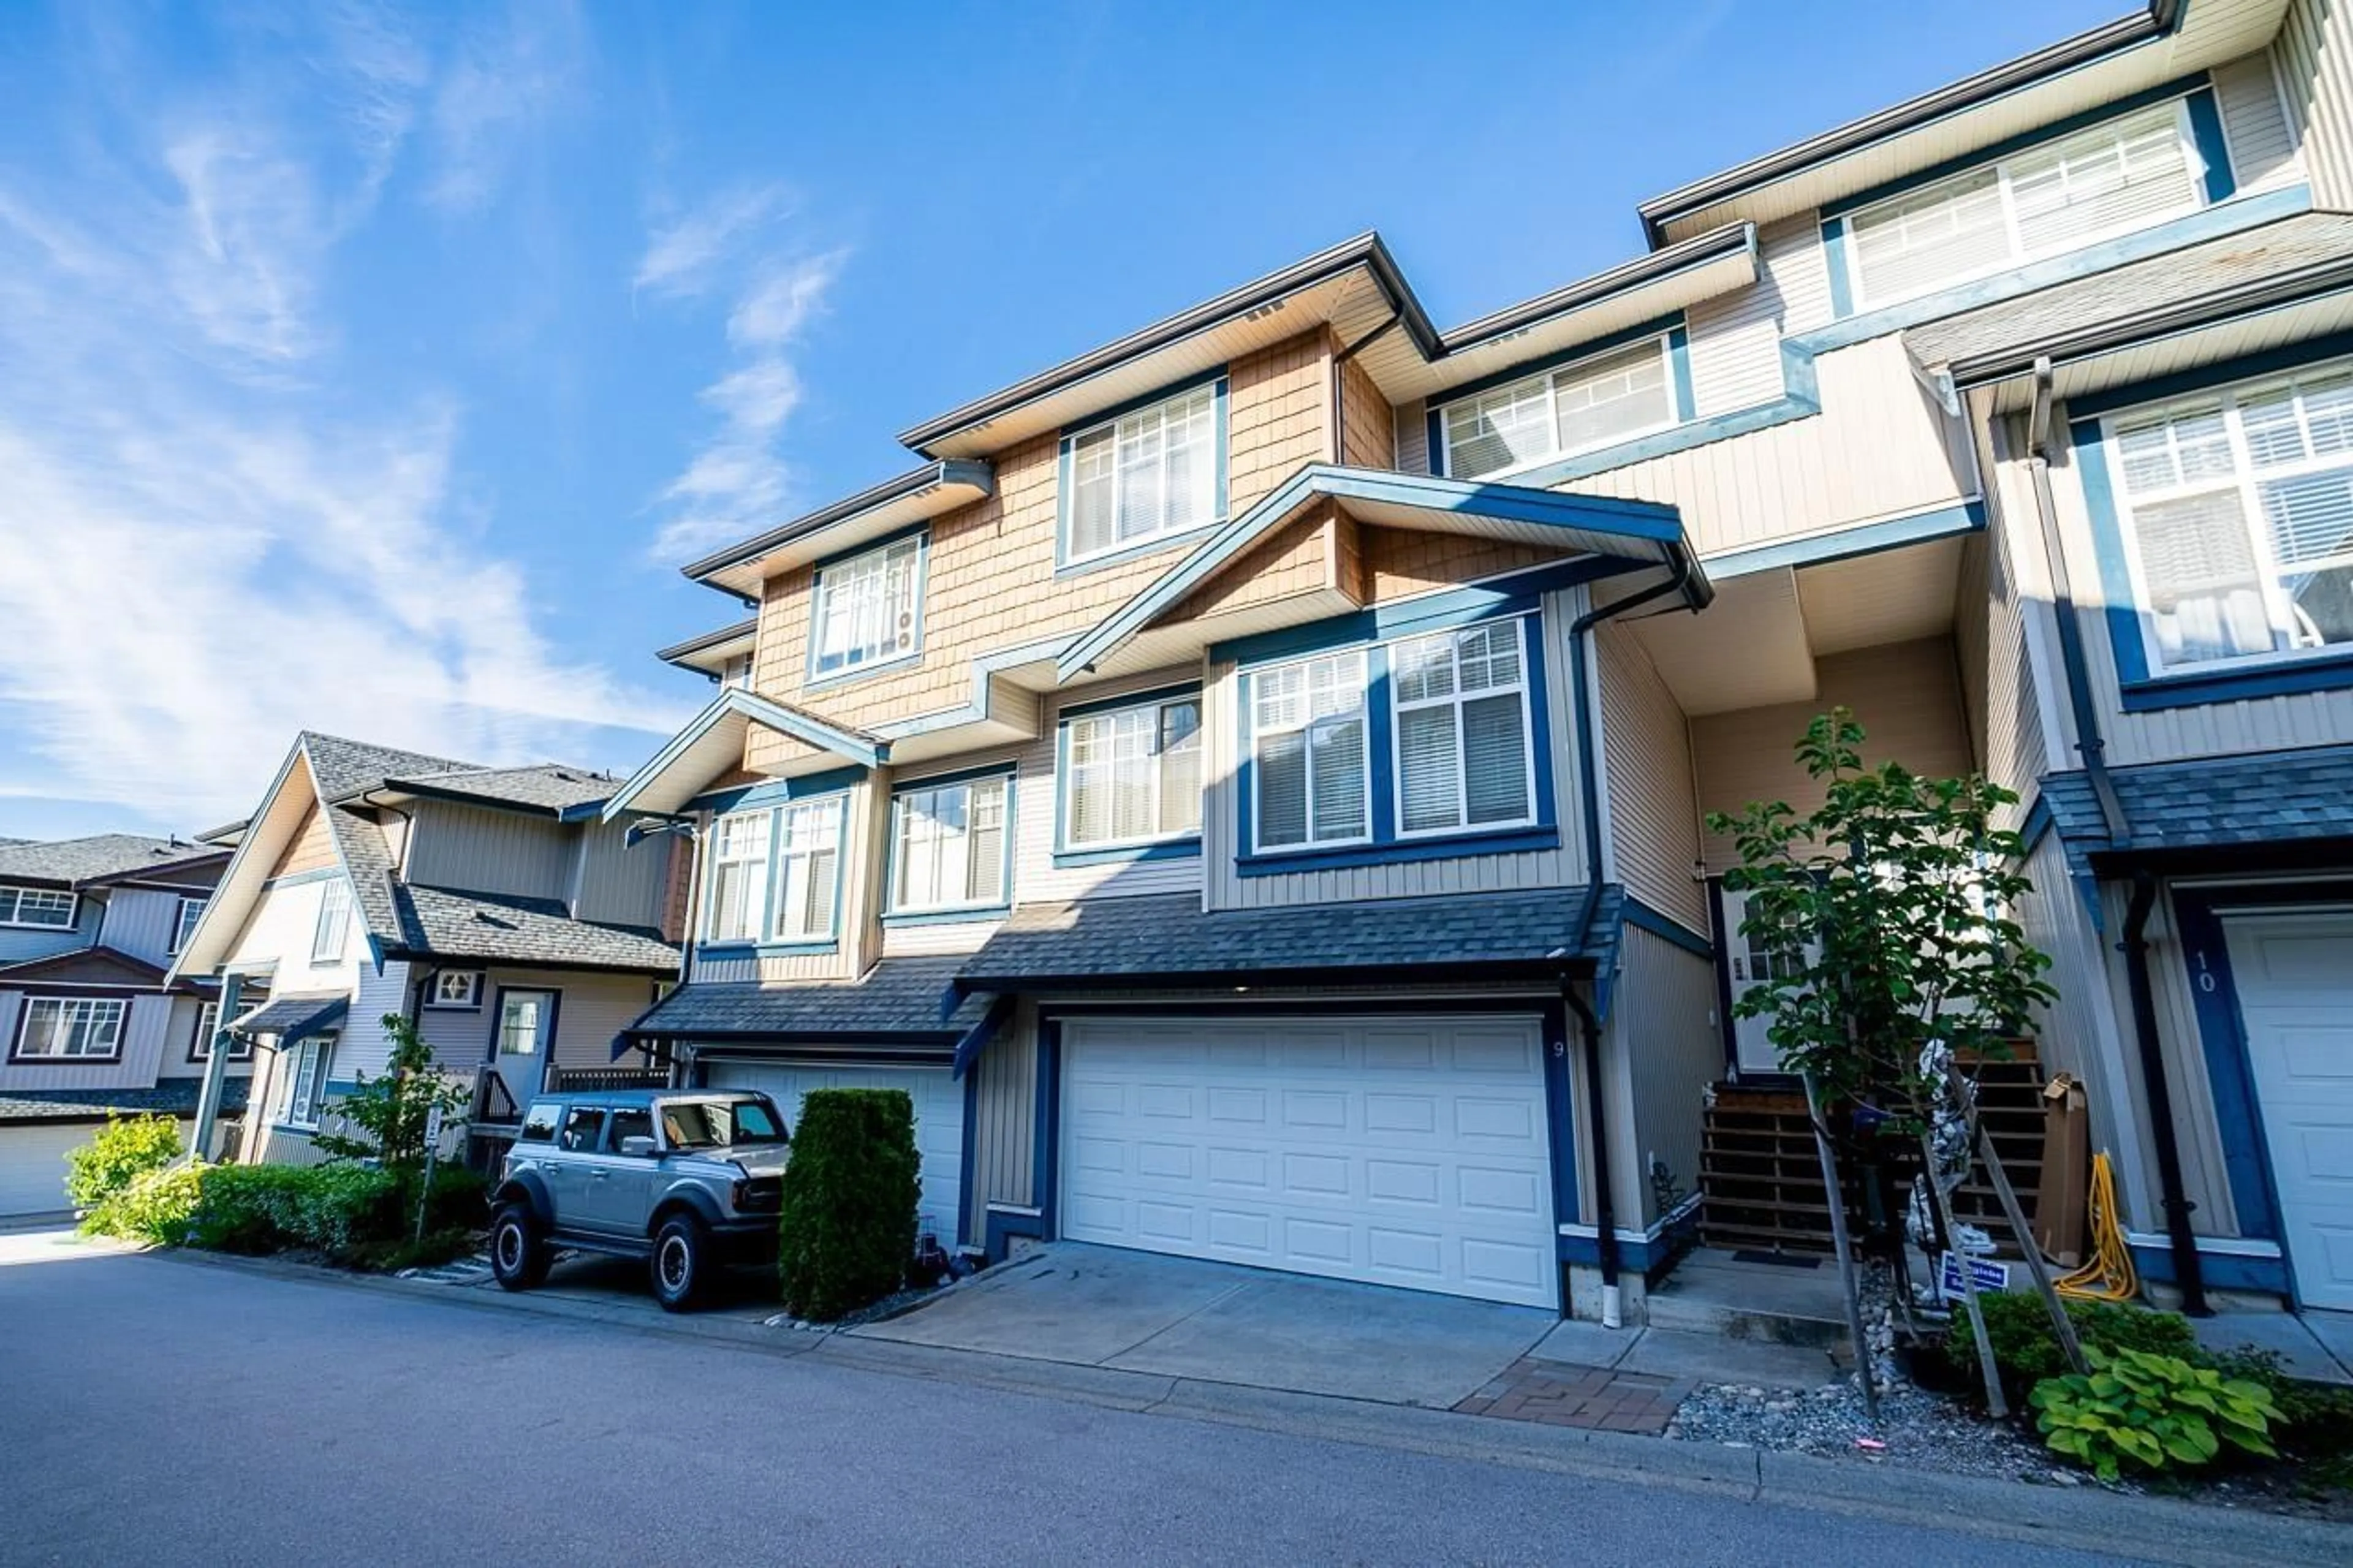 A pic from exterior of the house or condo for 9 14462 61A AVENUE, Surrey British Columbia V3S2W3